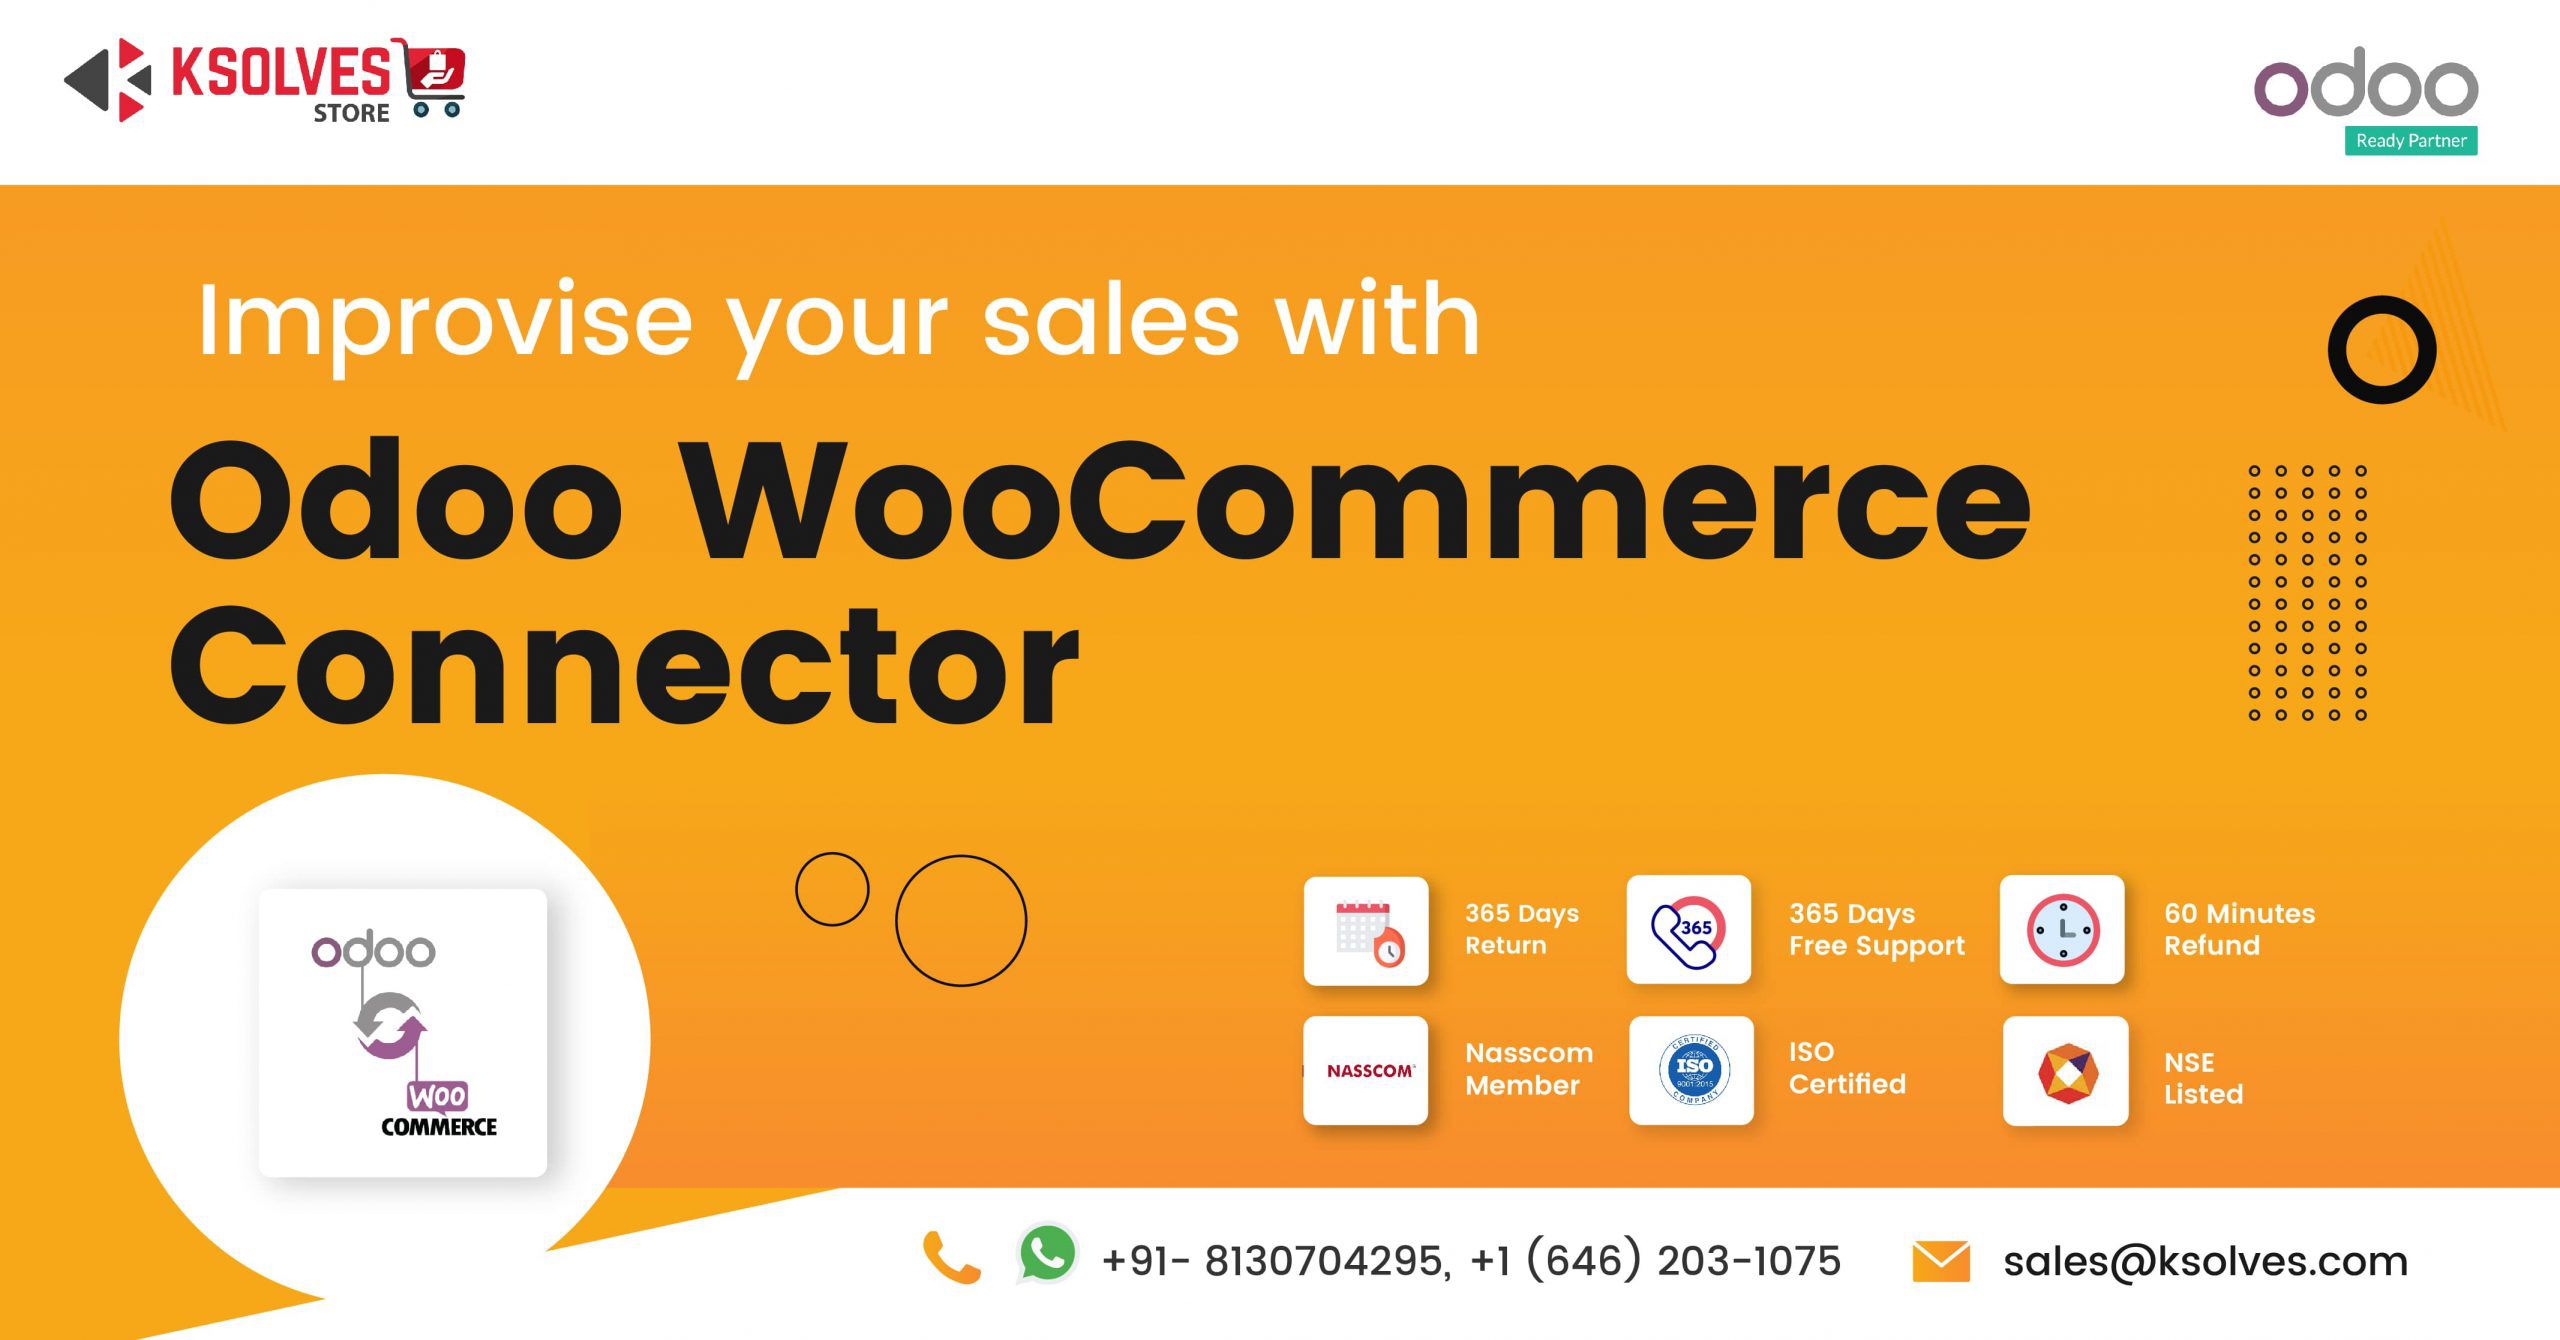 Sales with Odoo WooCommerce Connector